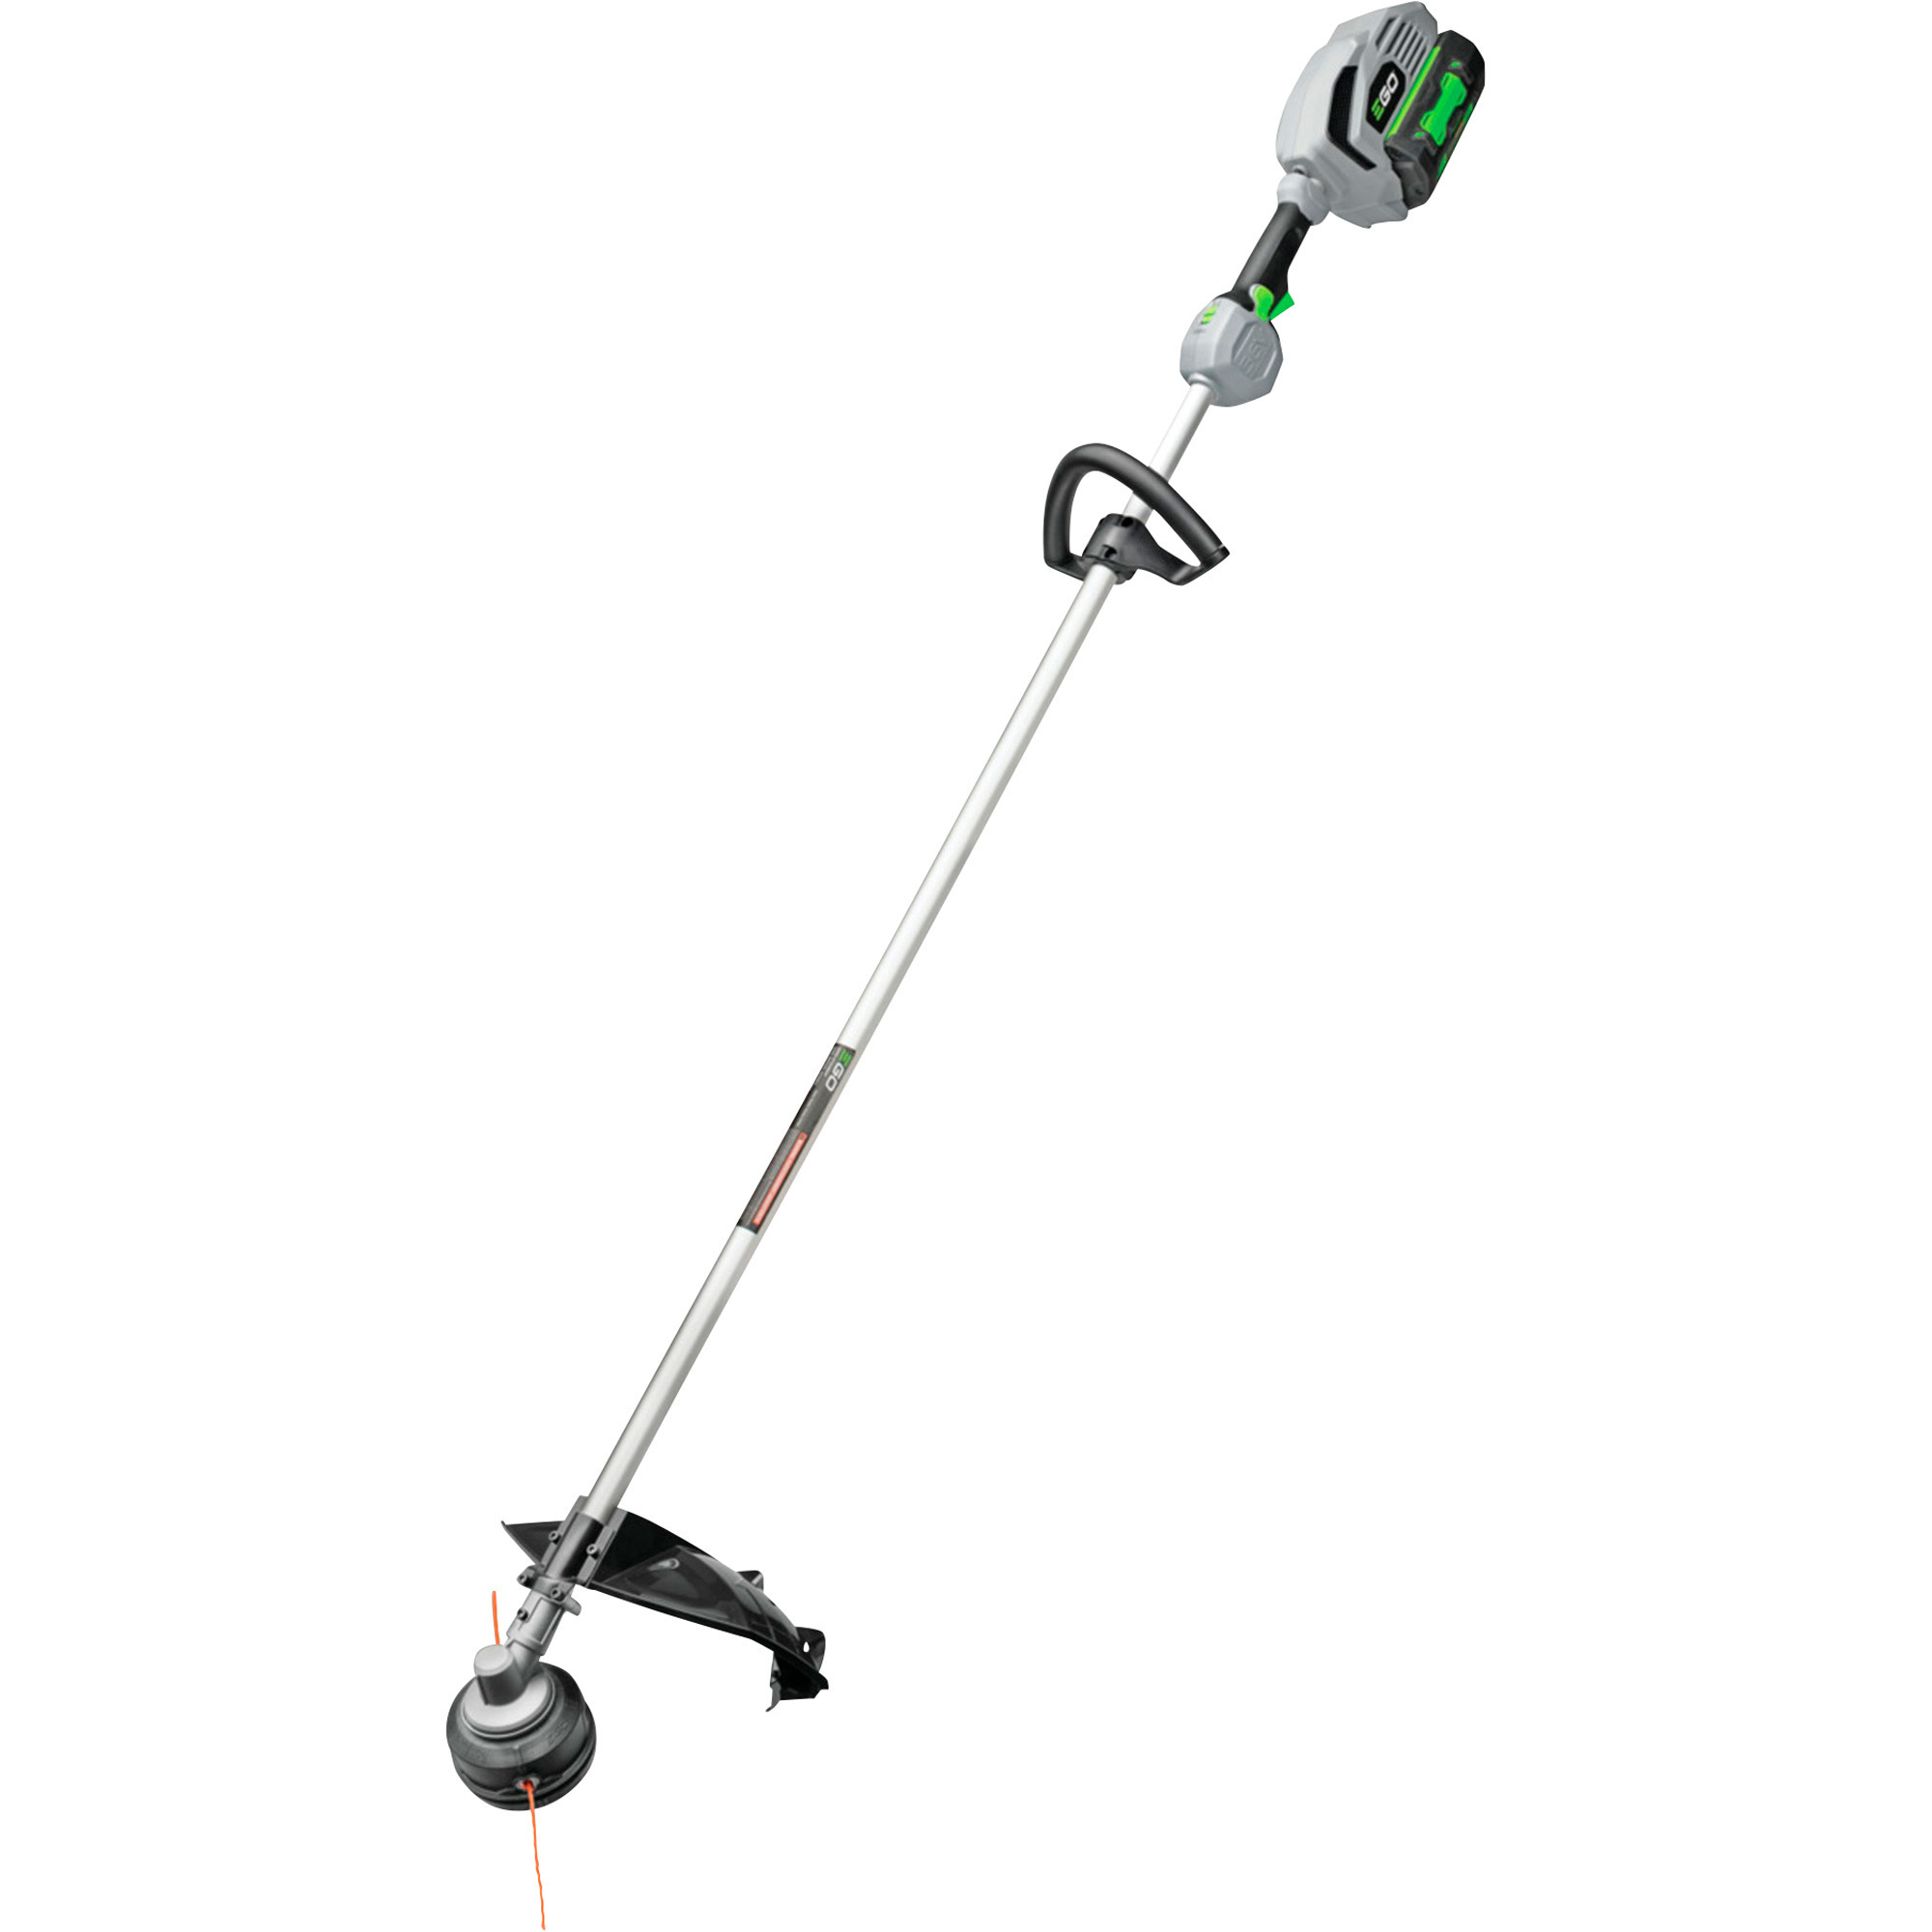 EGO 56V ARC Lithium String Trimmer with Rapid Reload Head, 15Inch Cutting Width, 5 Ah, Model ST1534